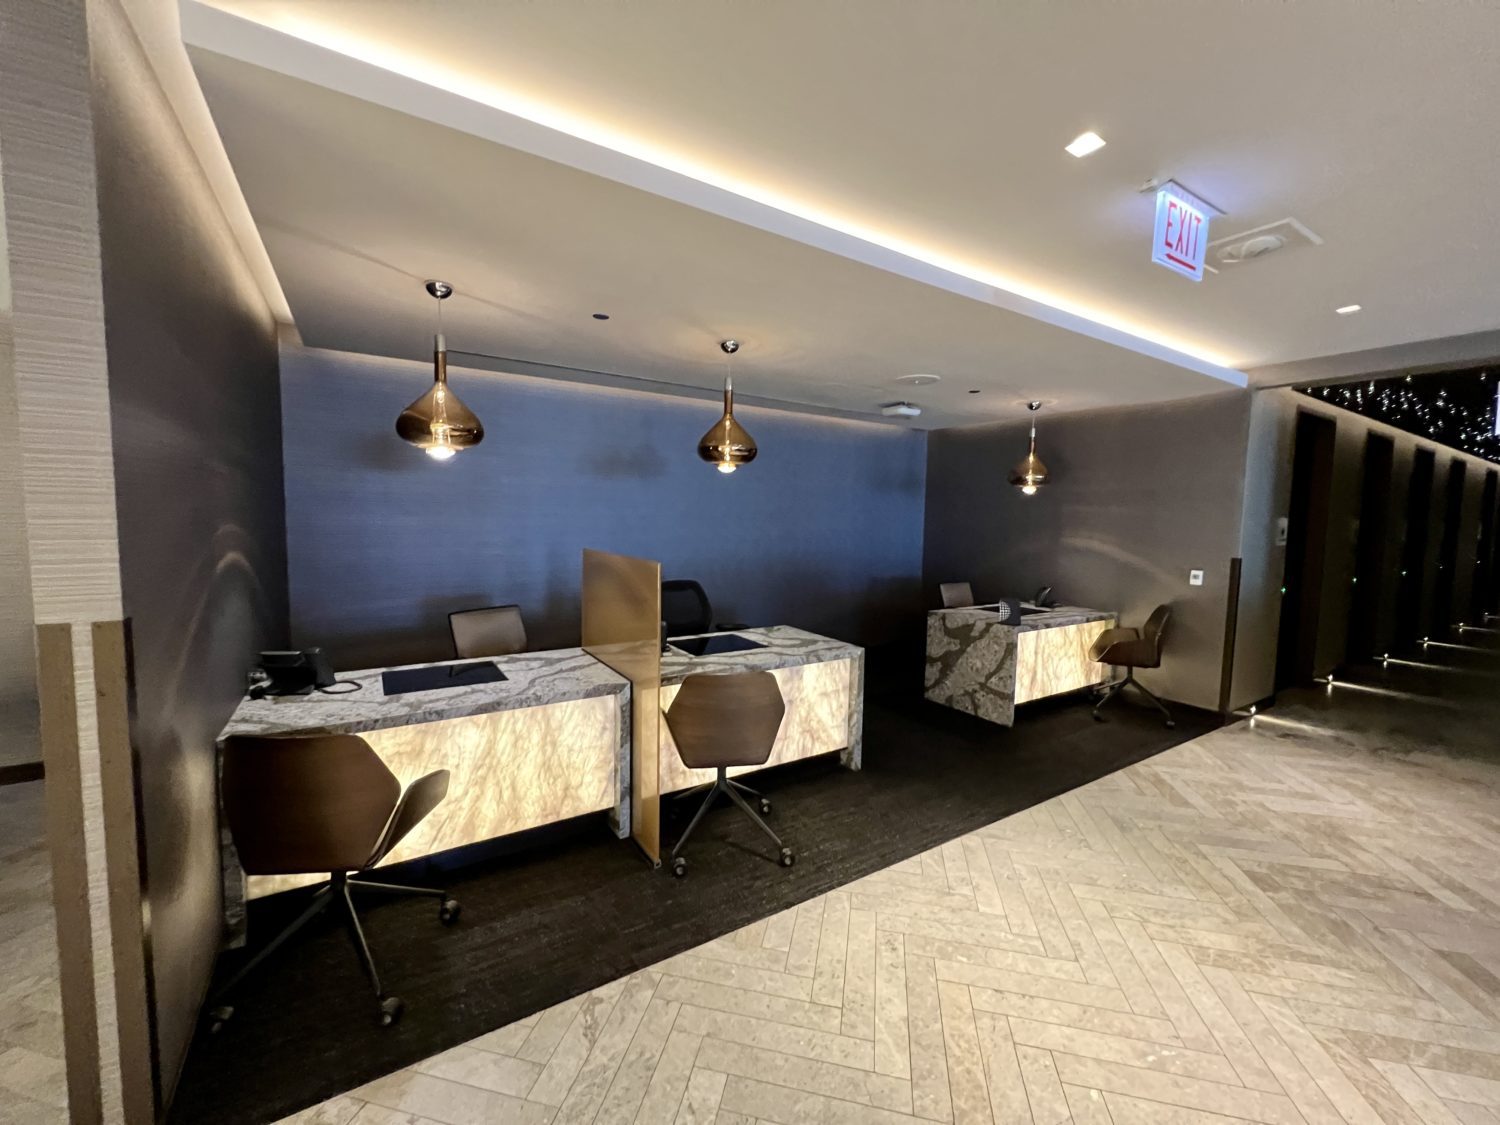 united polaris lounge chicago concierge  Beautiful But Busy: United Polaris Lounge Chicago-O&#039;Hare (ORD) Review – Thrifty Traveler &#8211; Thrifty Traveler united polaris lounge chicago concierge scaled